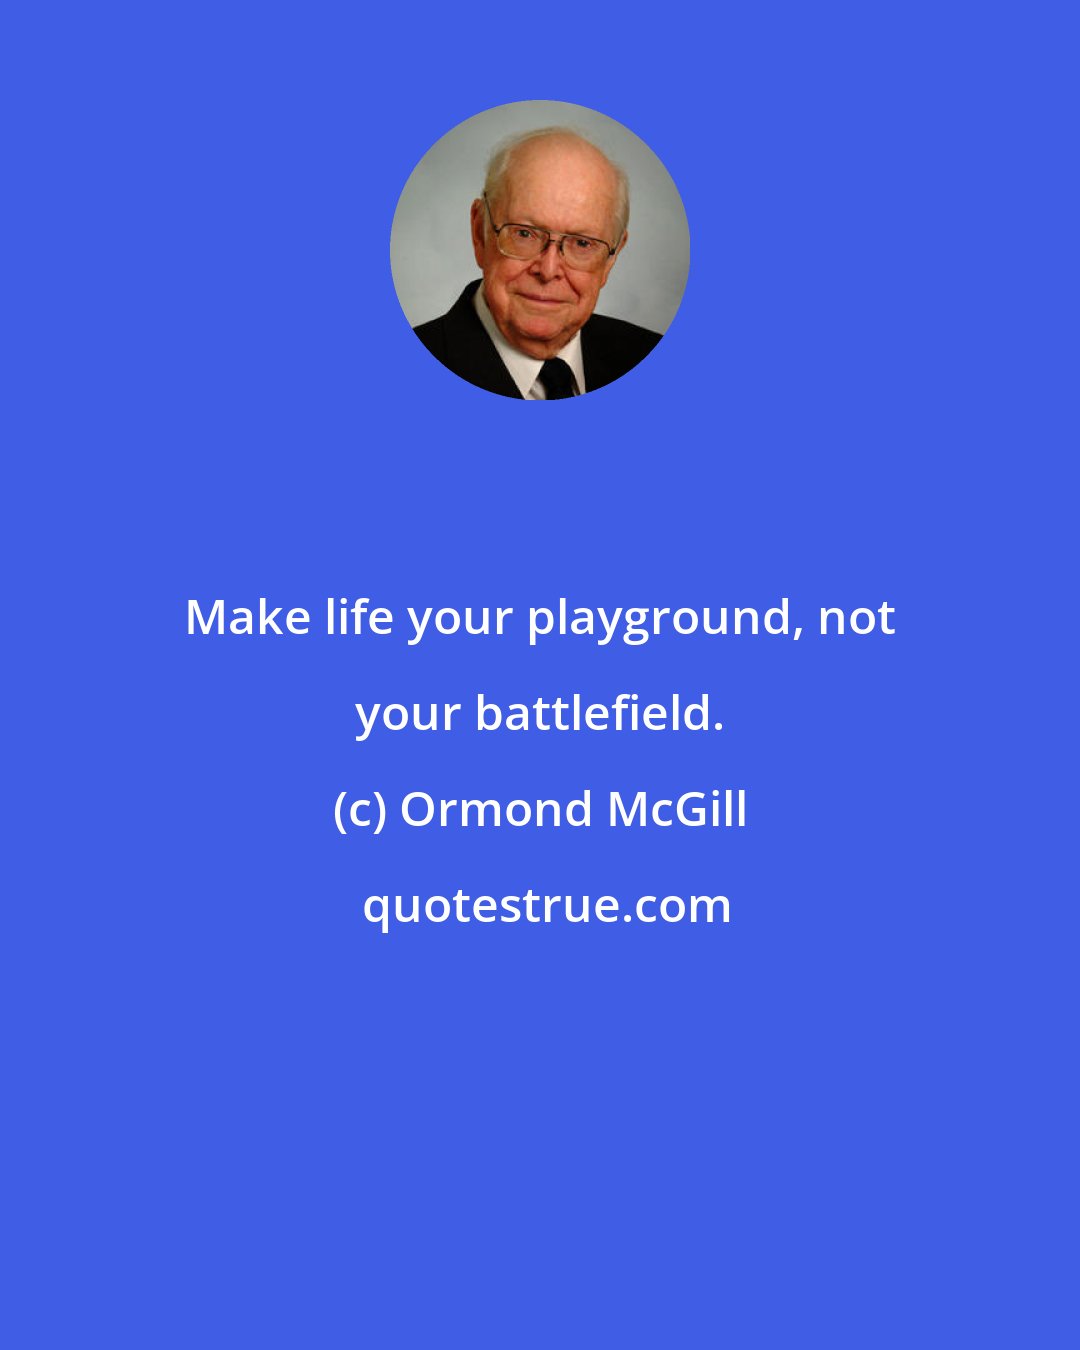 Ormond McGill: Make life your playground, not your battlefield.